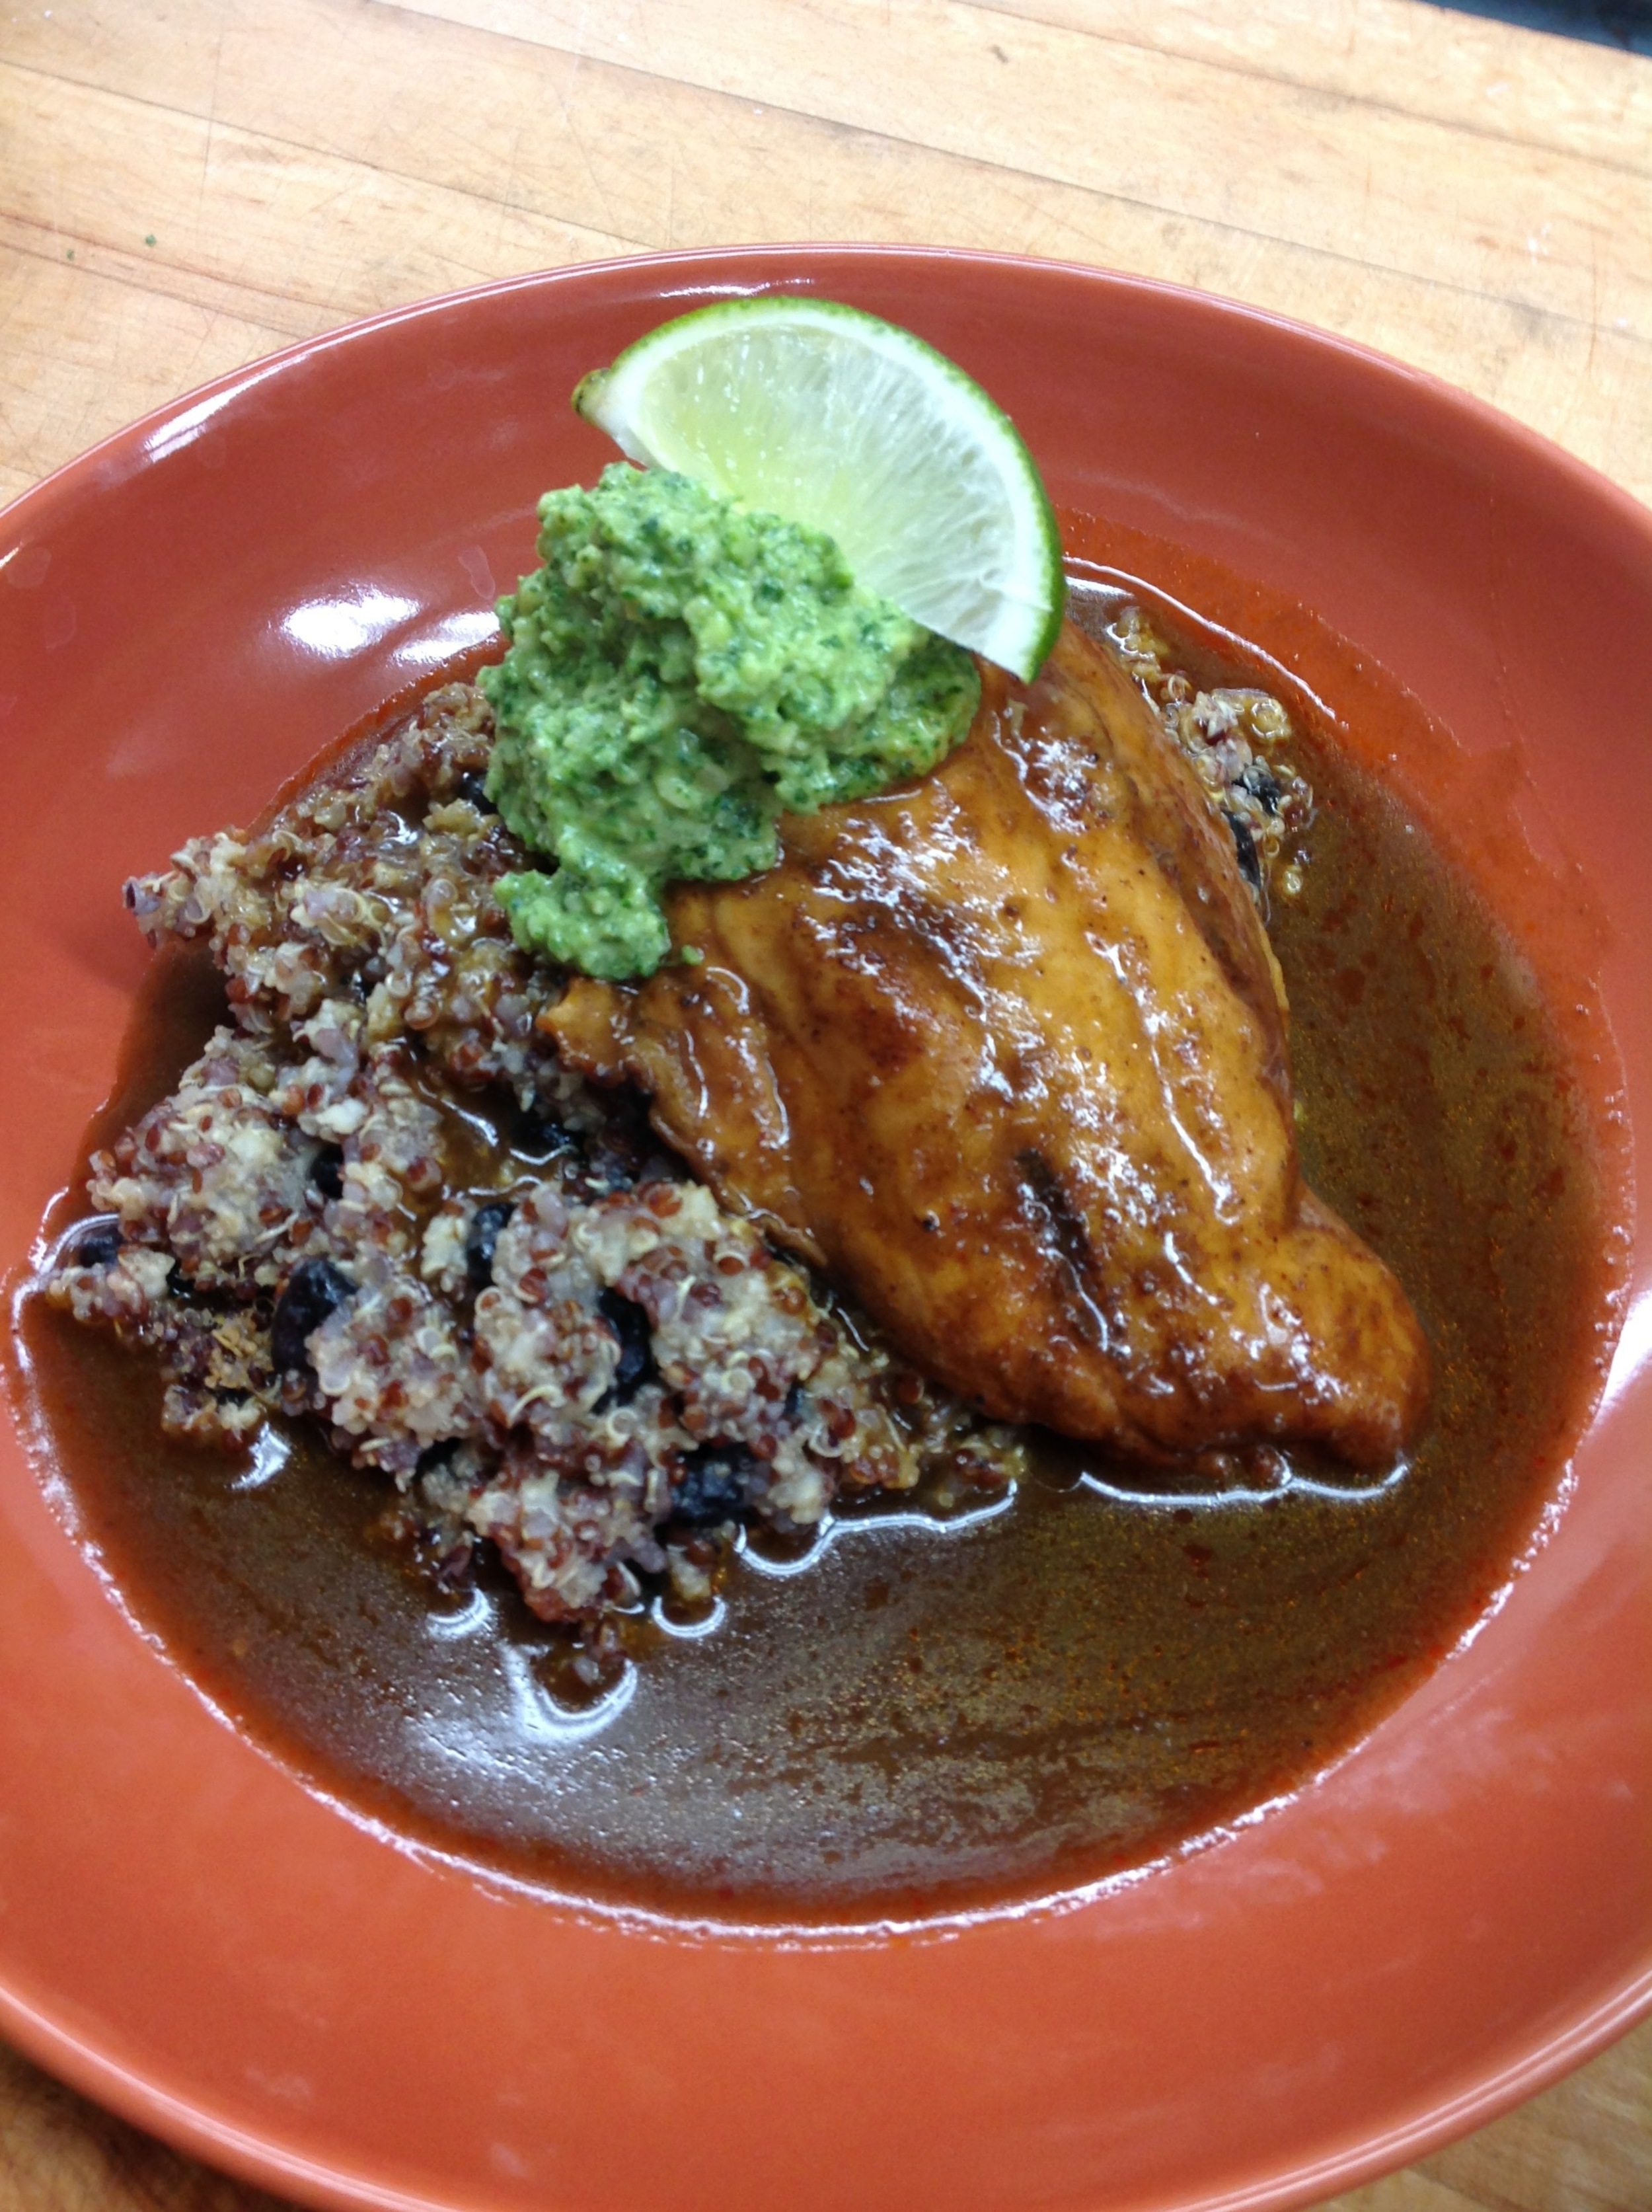 Slow roasted chicken with black beans